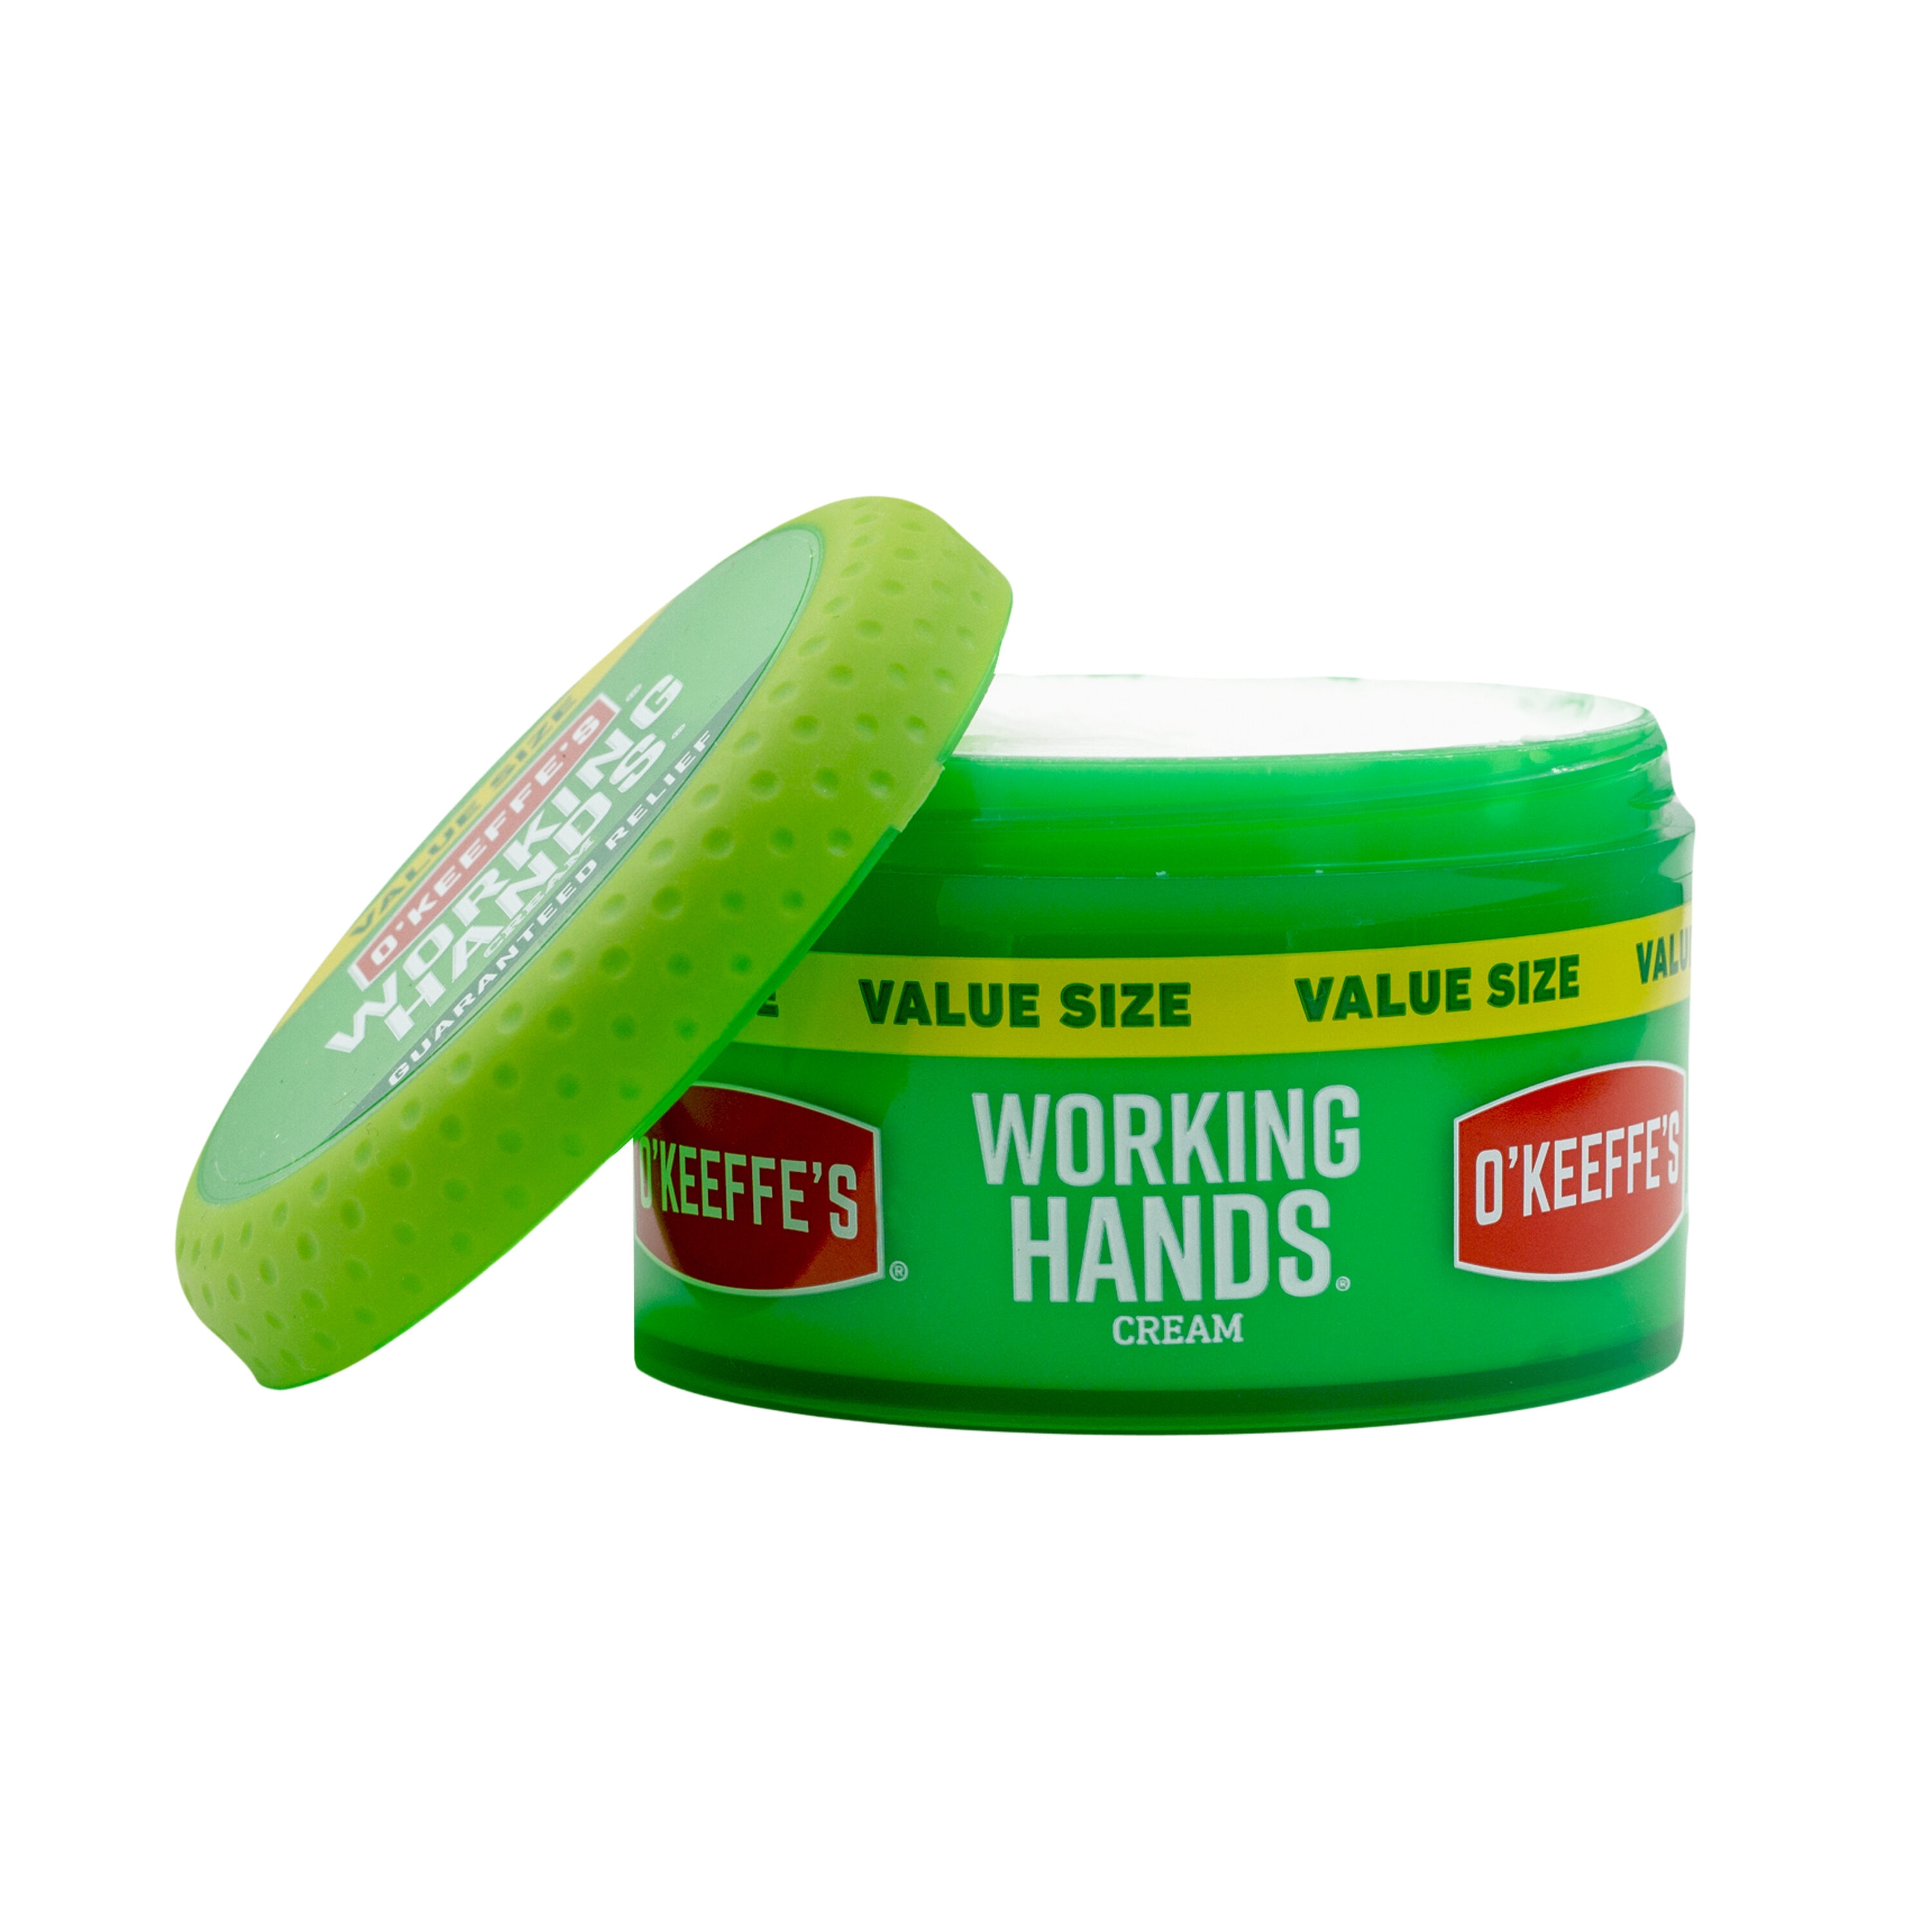 O'Keeffe's Working Hands 6.8-oz Hand Cream (8-Pack) in the